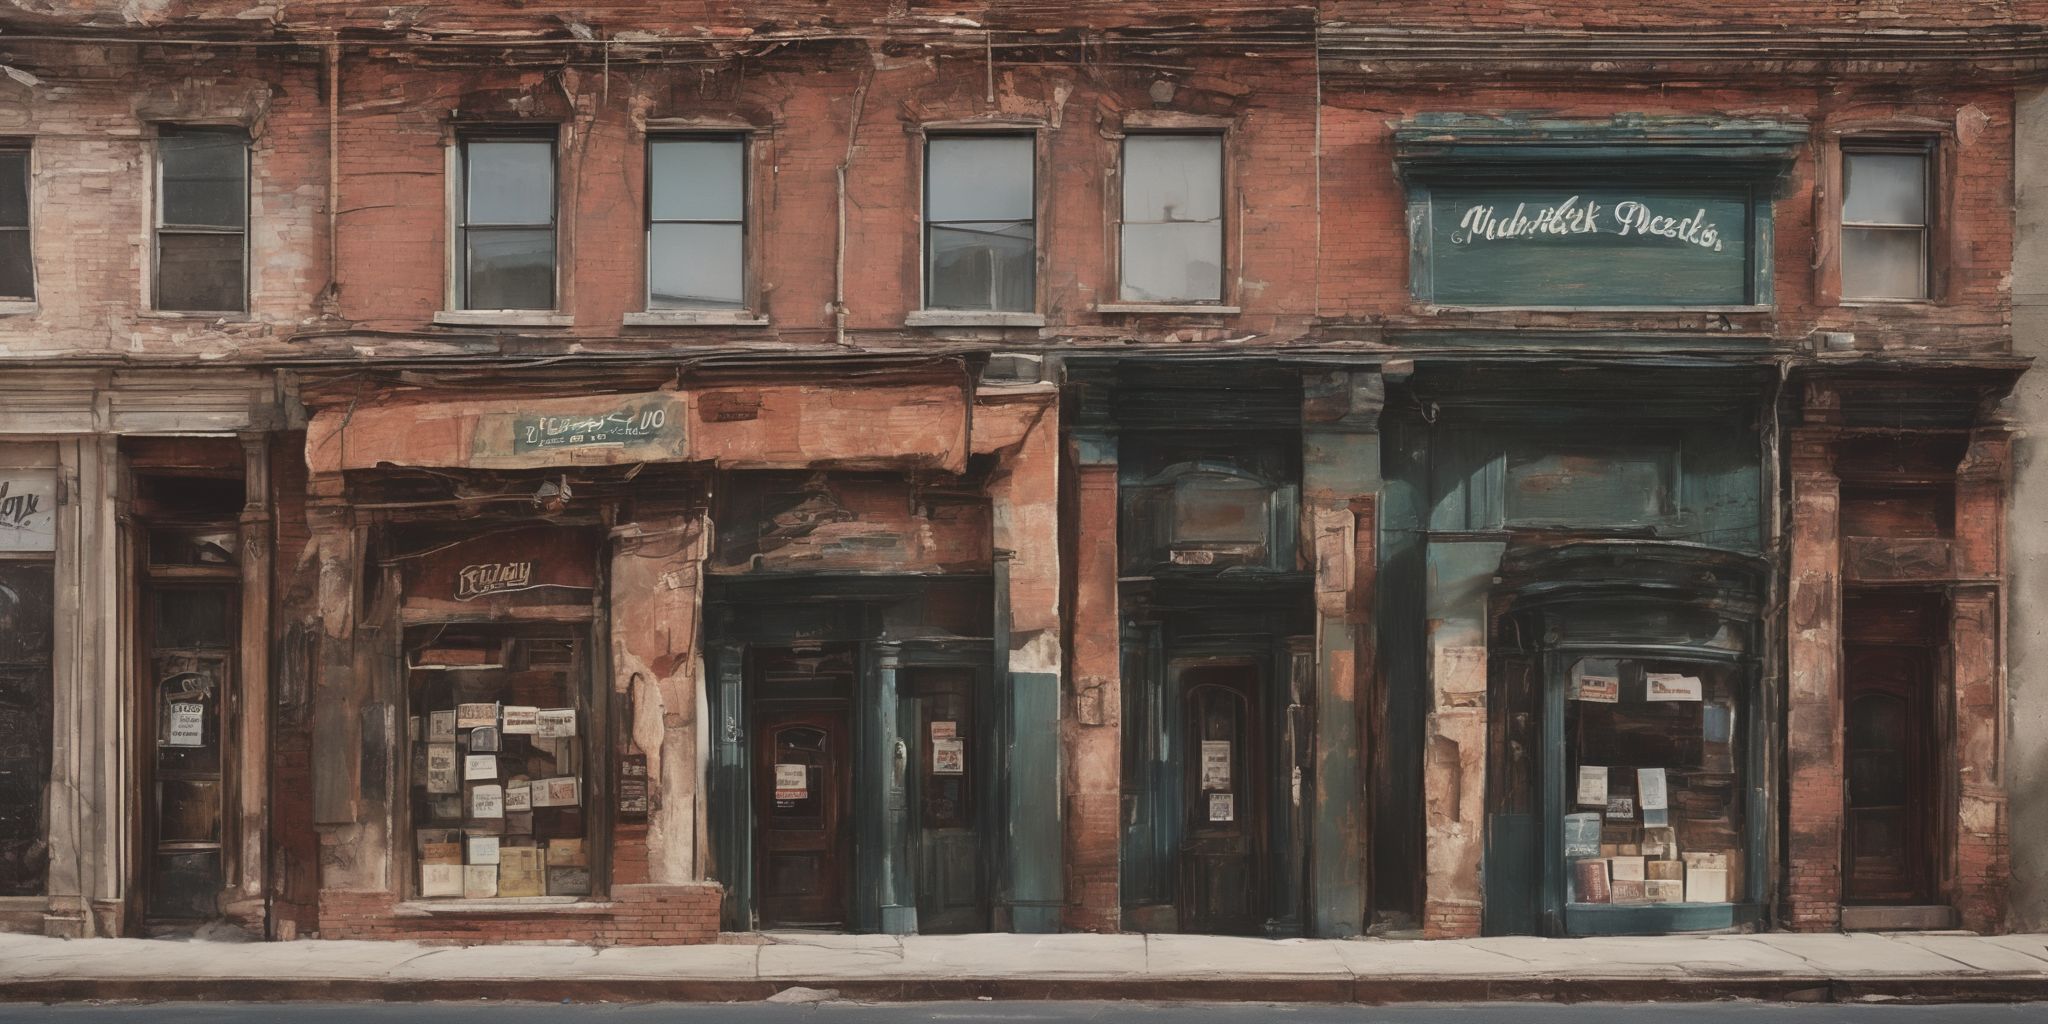 Loan stores  in realistic, photographic style